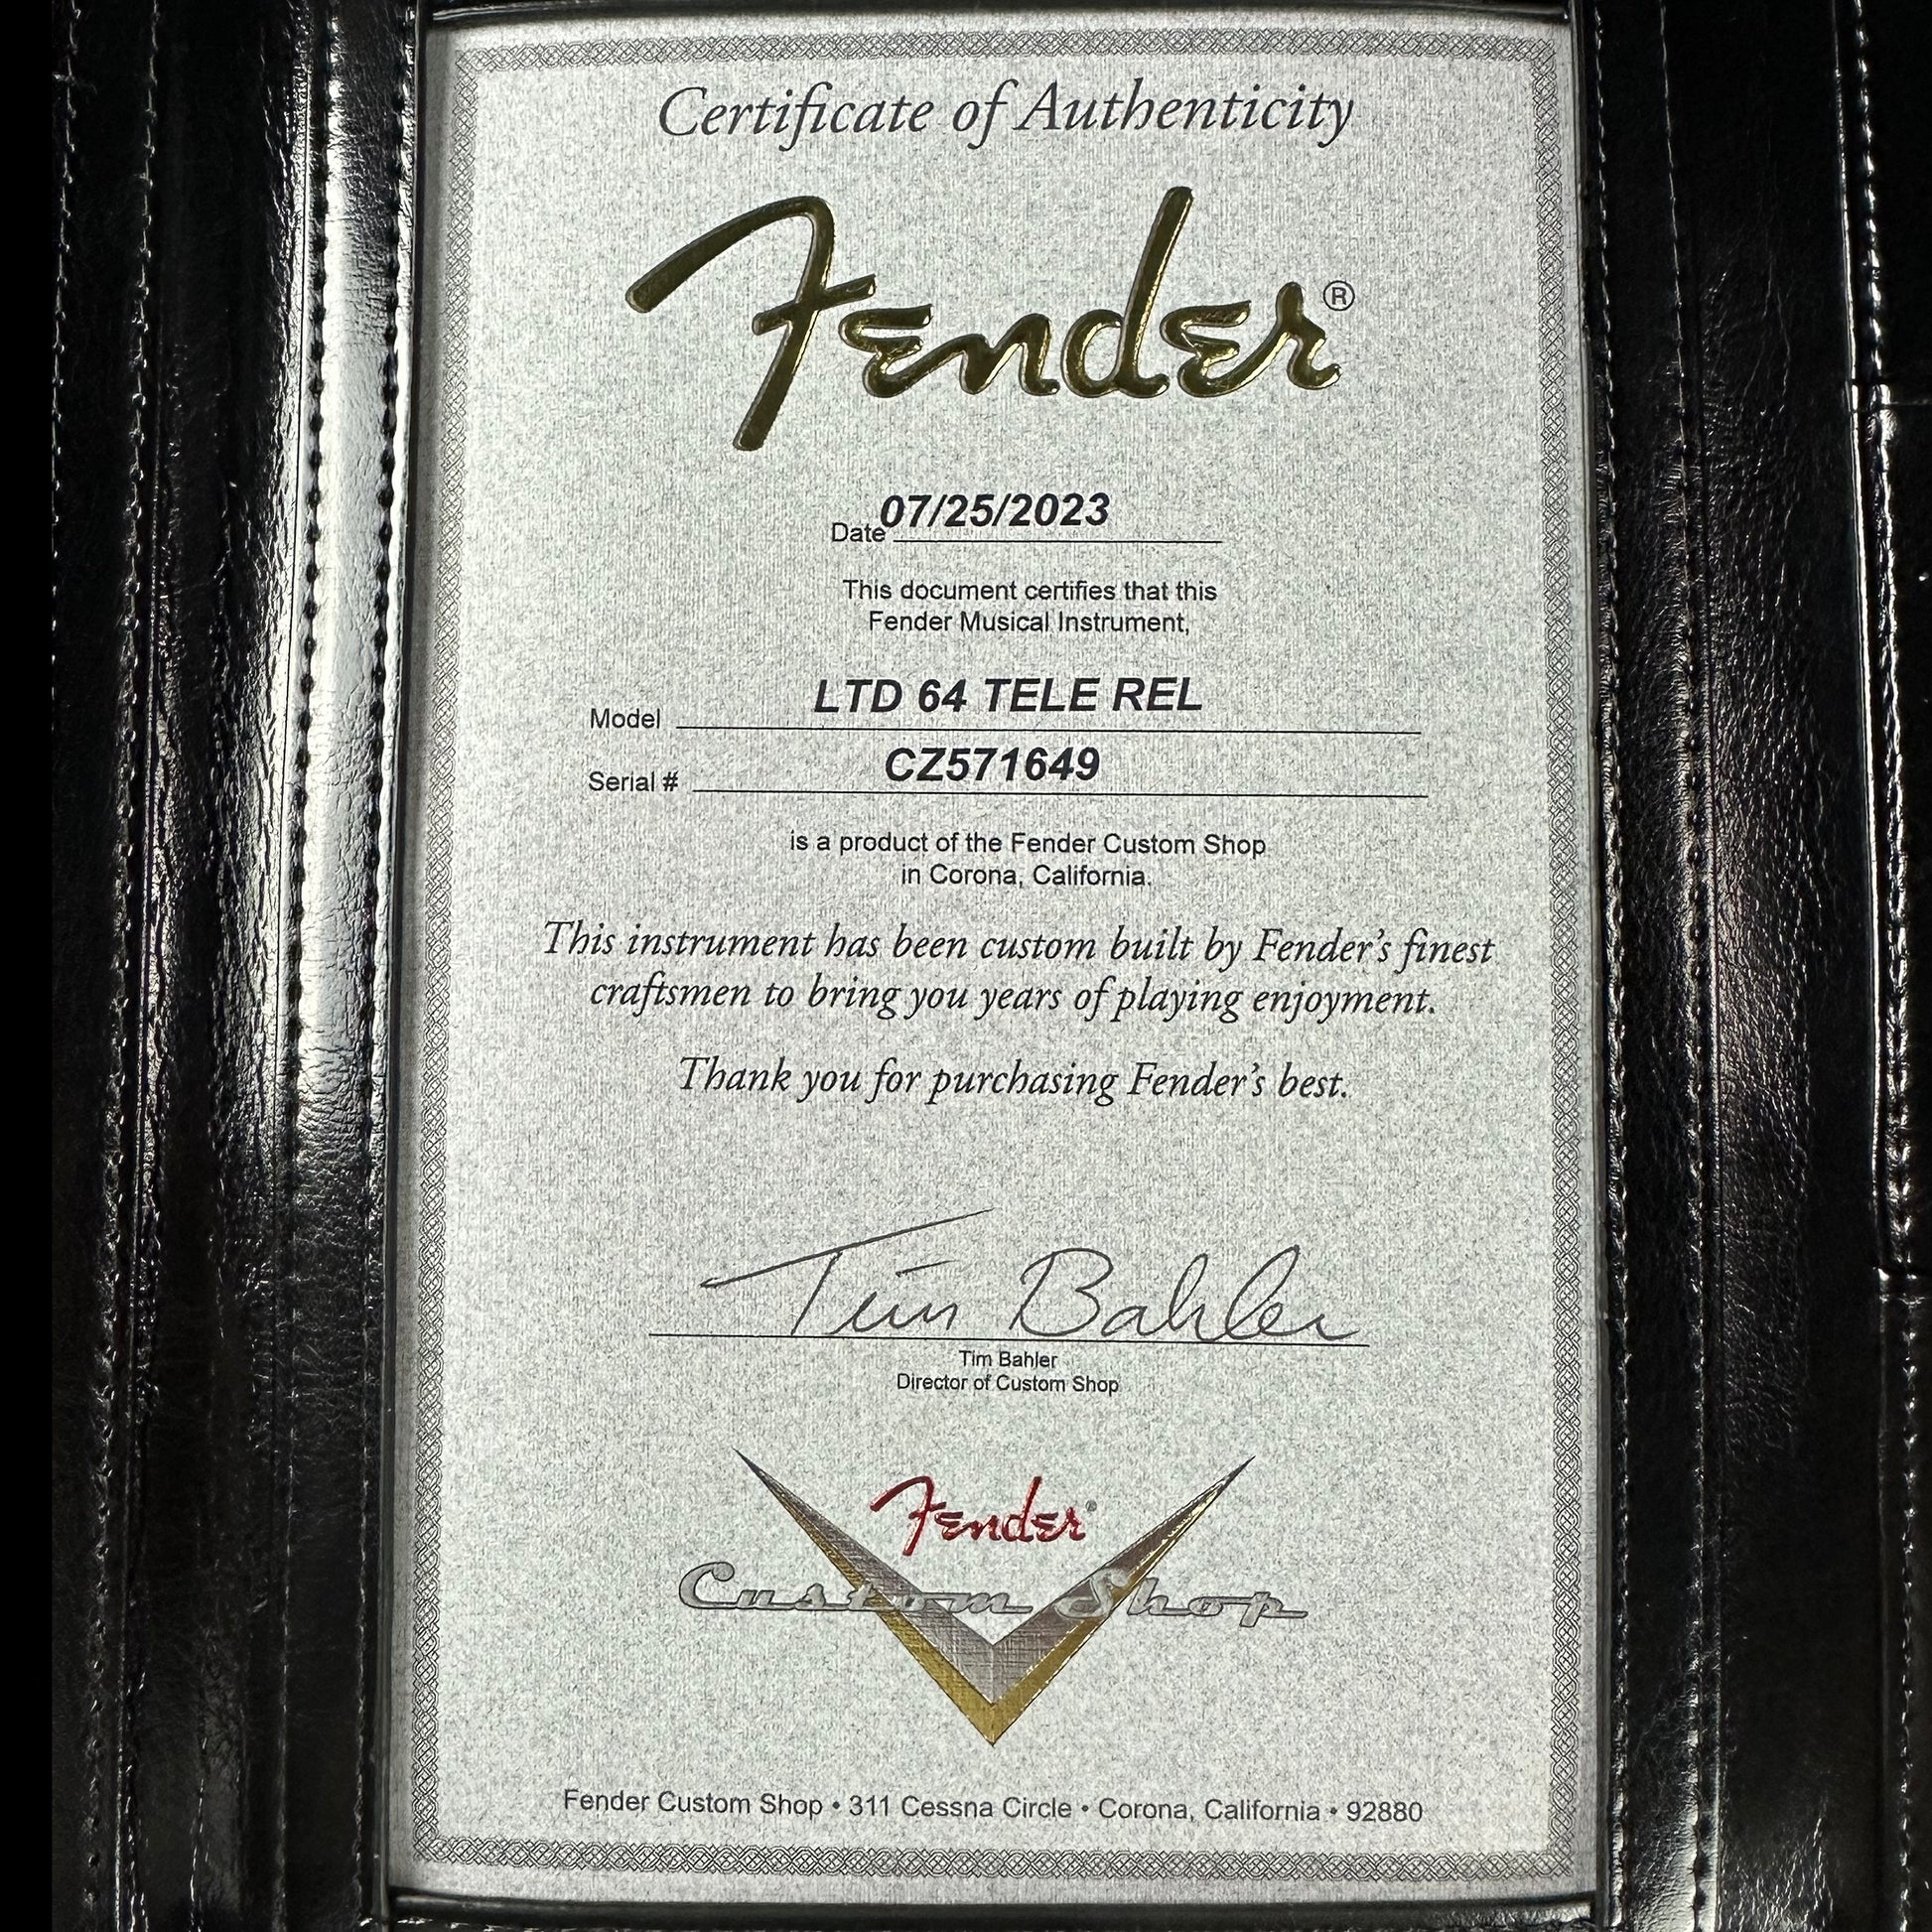 Certificate of Authenticity for Fender Custom Shop Limited Edition '64 Tele Relic Aged Sherwood Green Metallic.